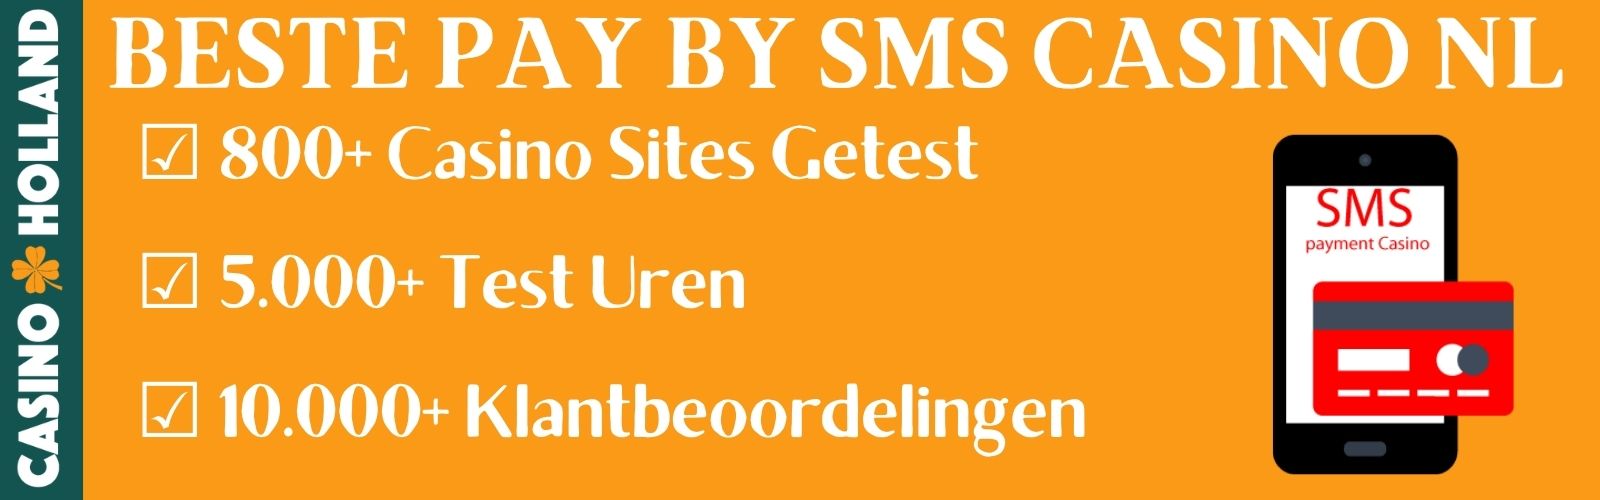 Pay by SMS casino